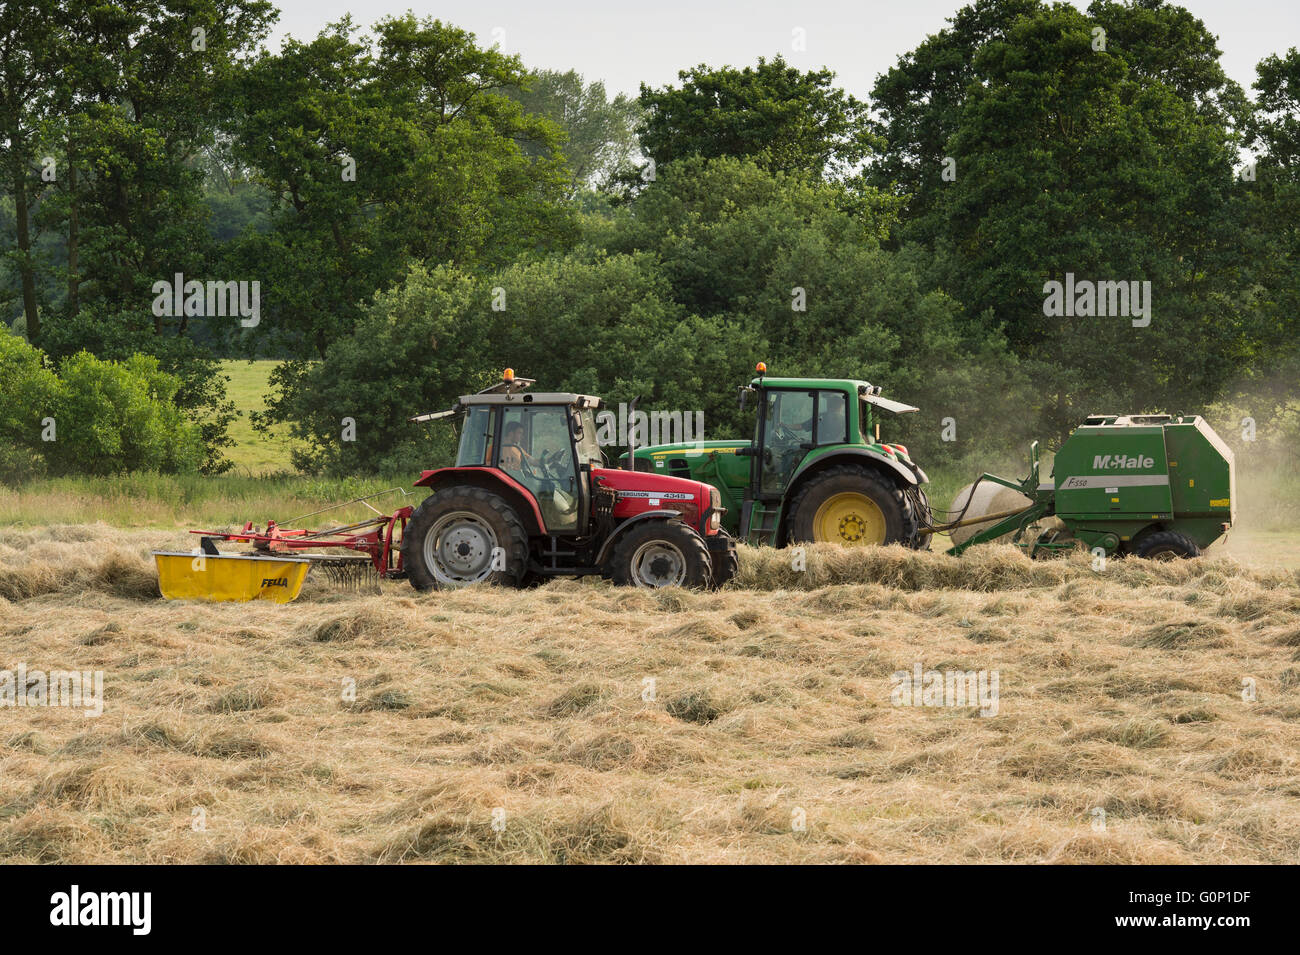 Two farm tractors silage making in a field at Great Ouseburn, North Yorkshire, England - a green one pulling a baler, a red one dragging a rake. Stock Photo